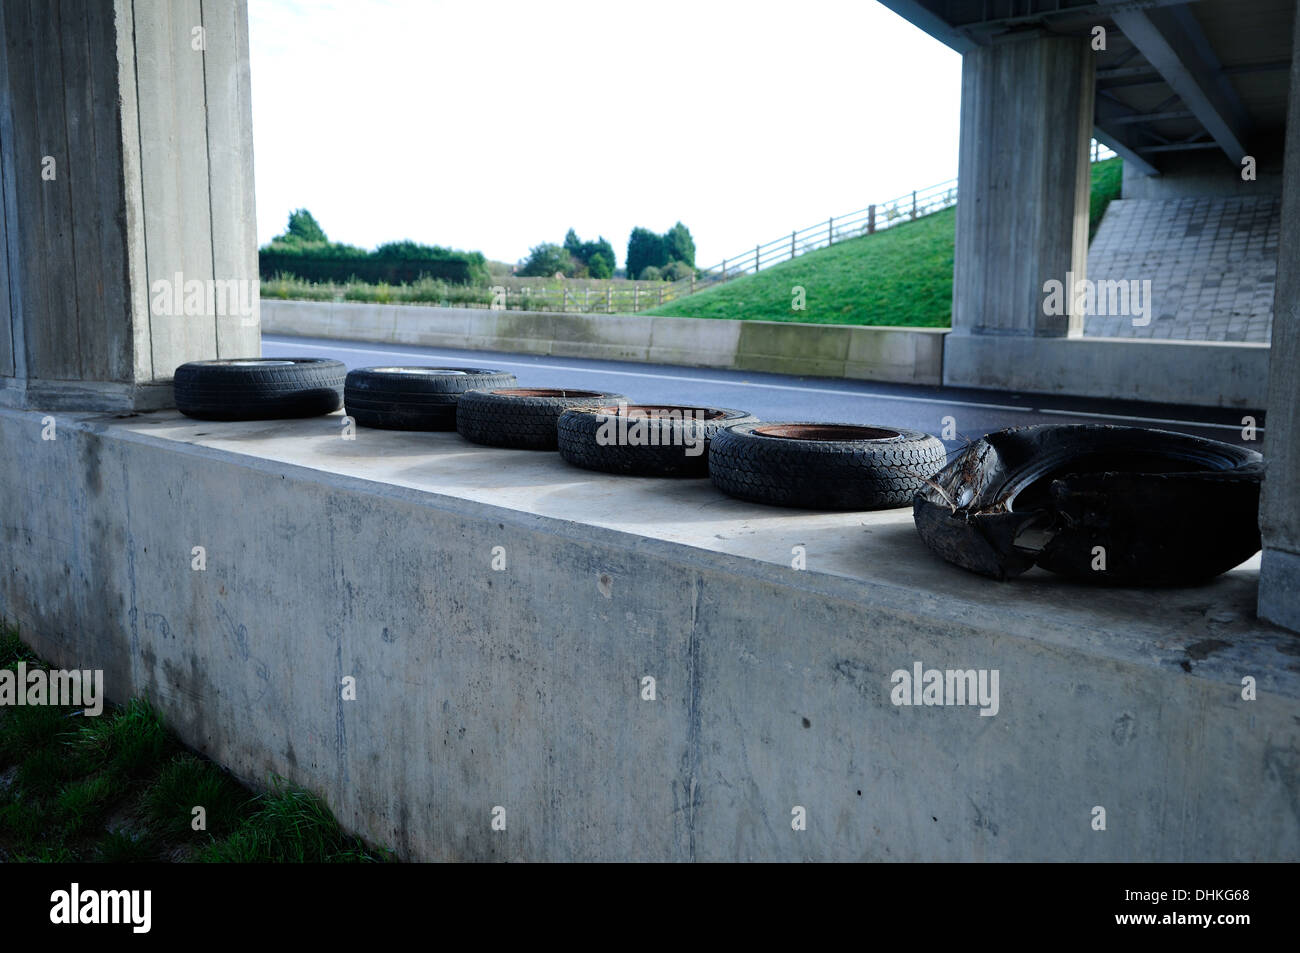 Salvaged Tyres Found On Or Along Roadside .A46 Nottinghamshire,UK. Stock Photo